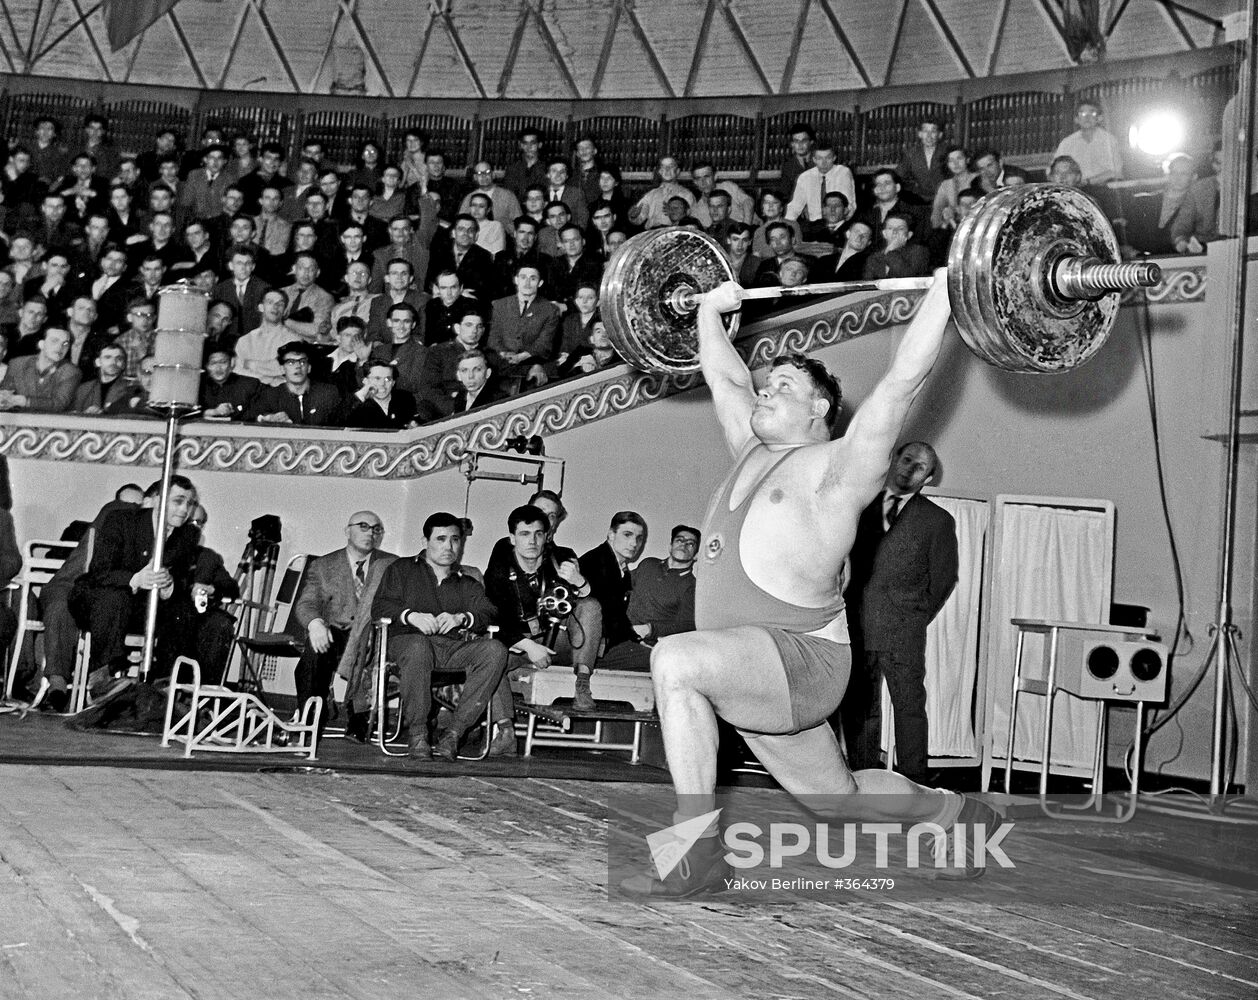 The first Soviet weight-lifting champion Aleksei Medvedev (+ 90kg)